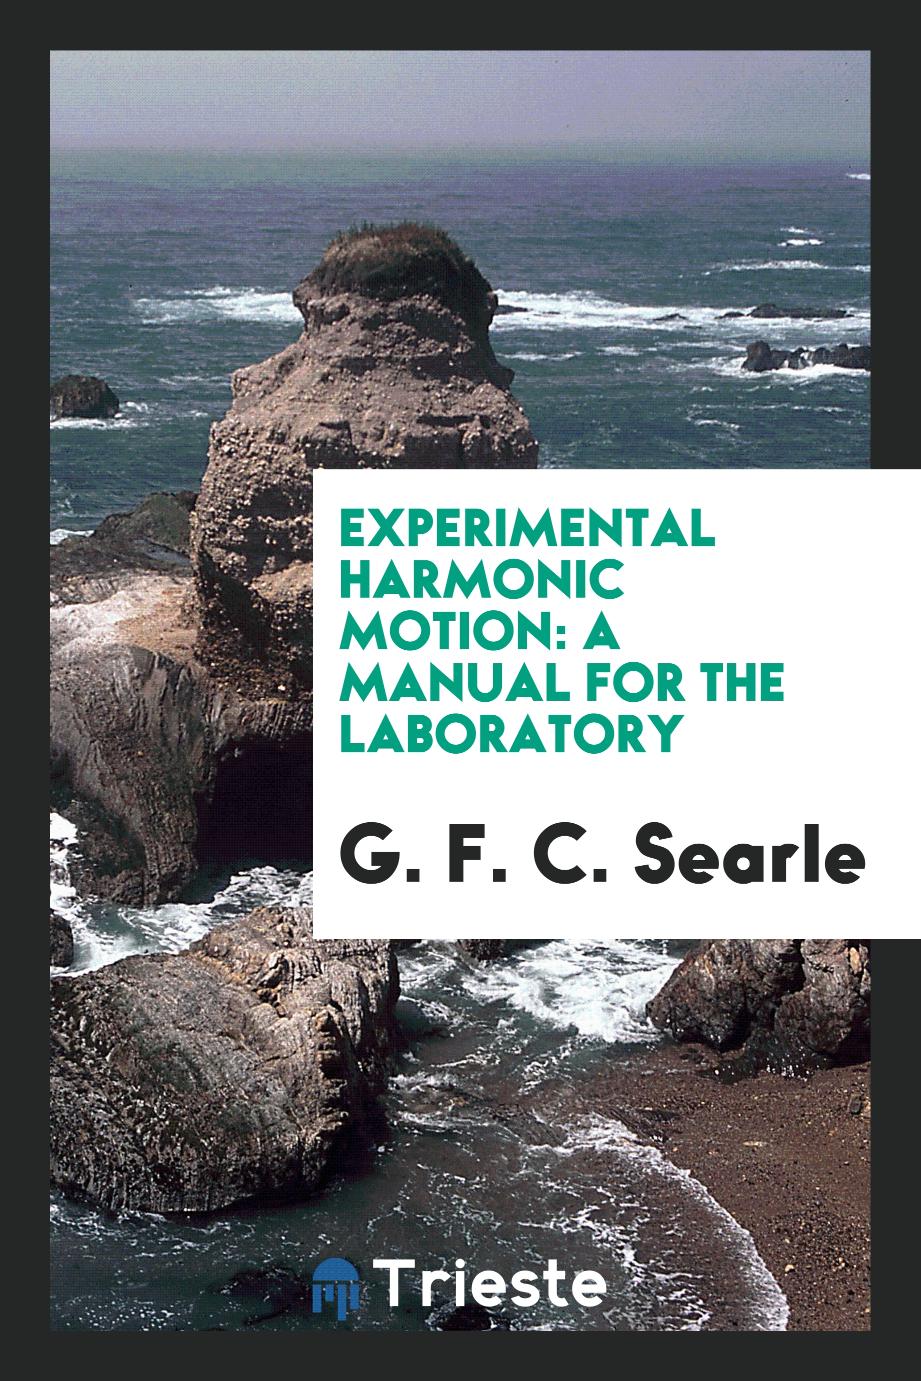 Experimental Harmonic Motion: A Manual for the Laboratory